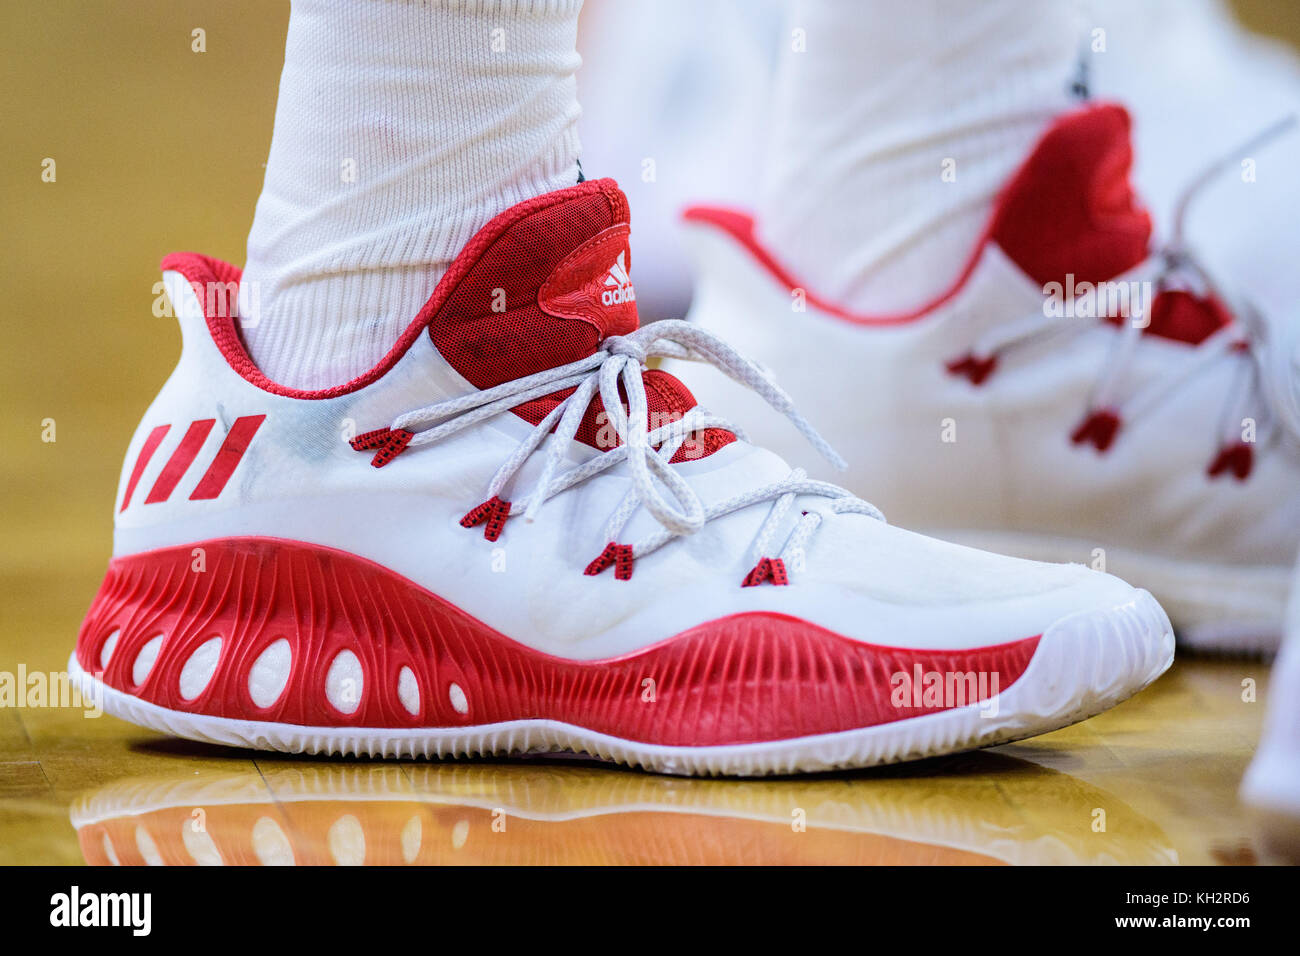 nc state adidas shoes